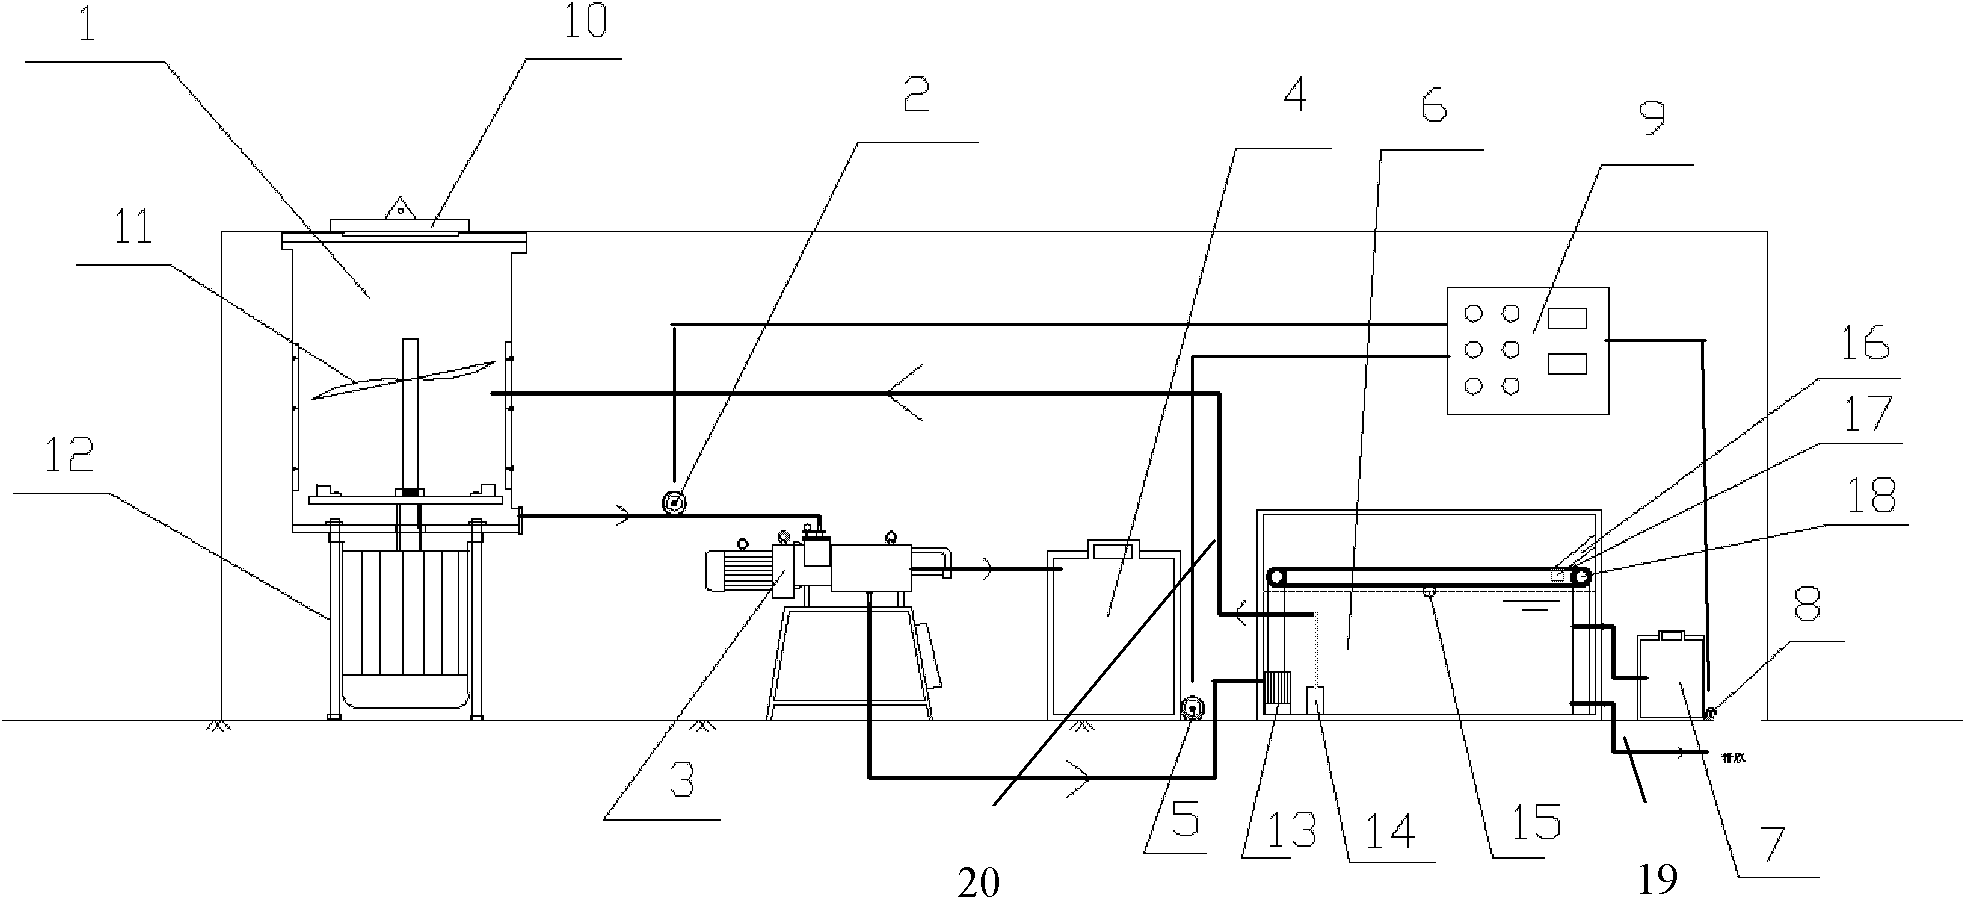 Food waste sorting and processing device